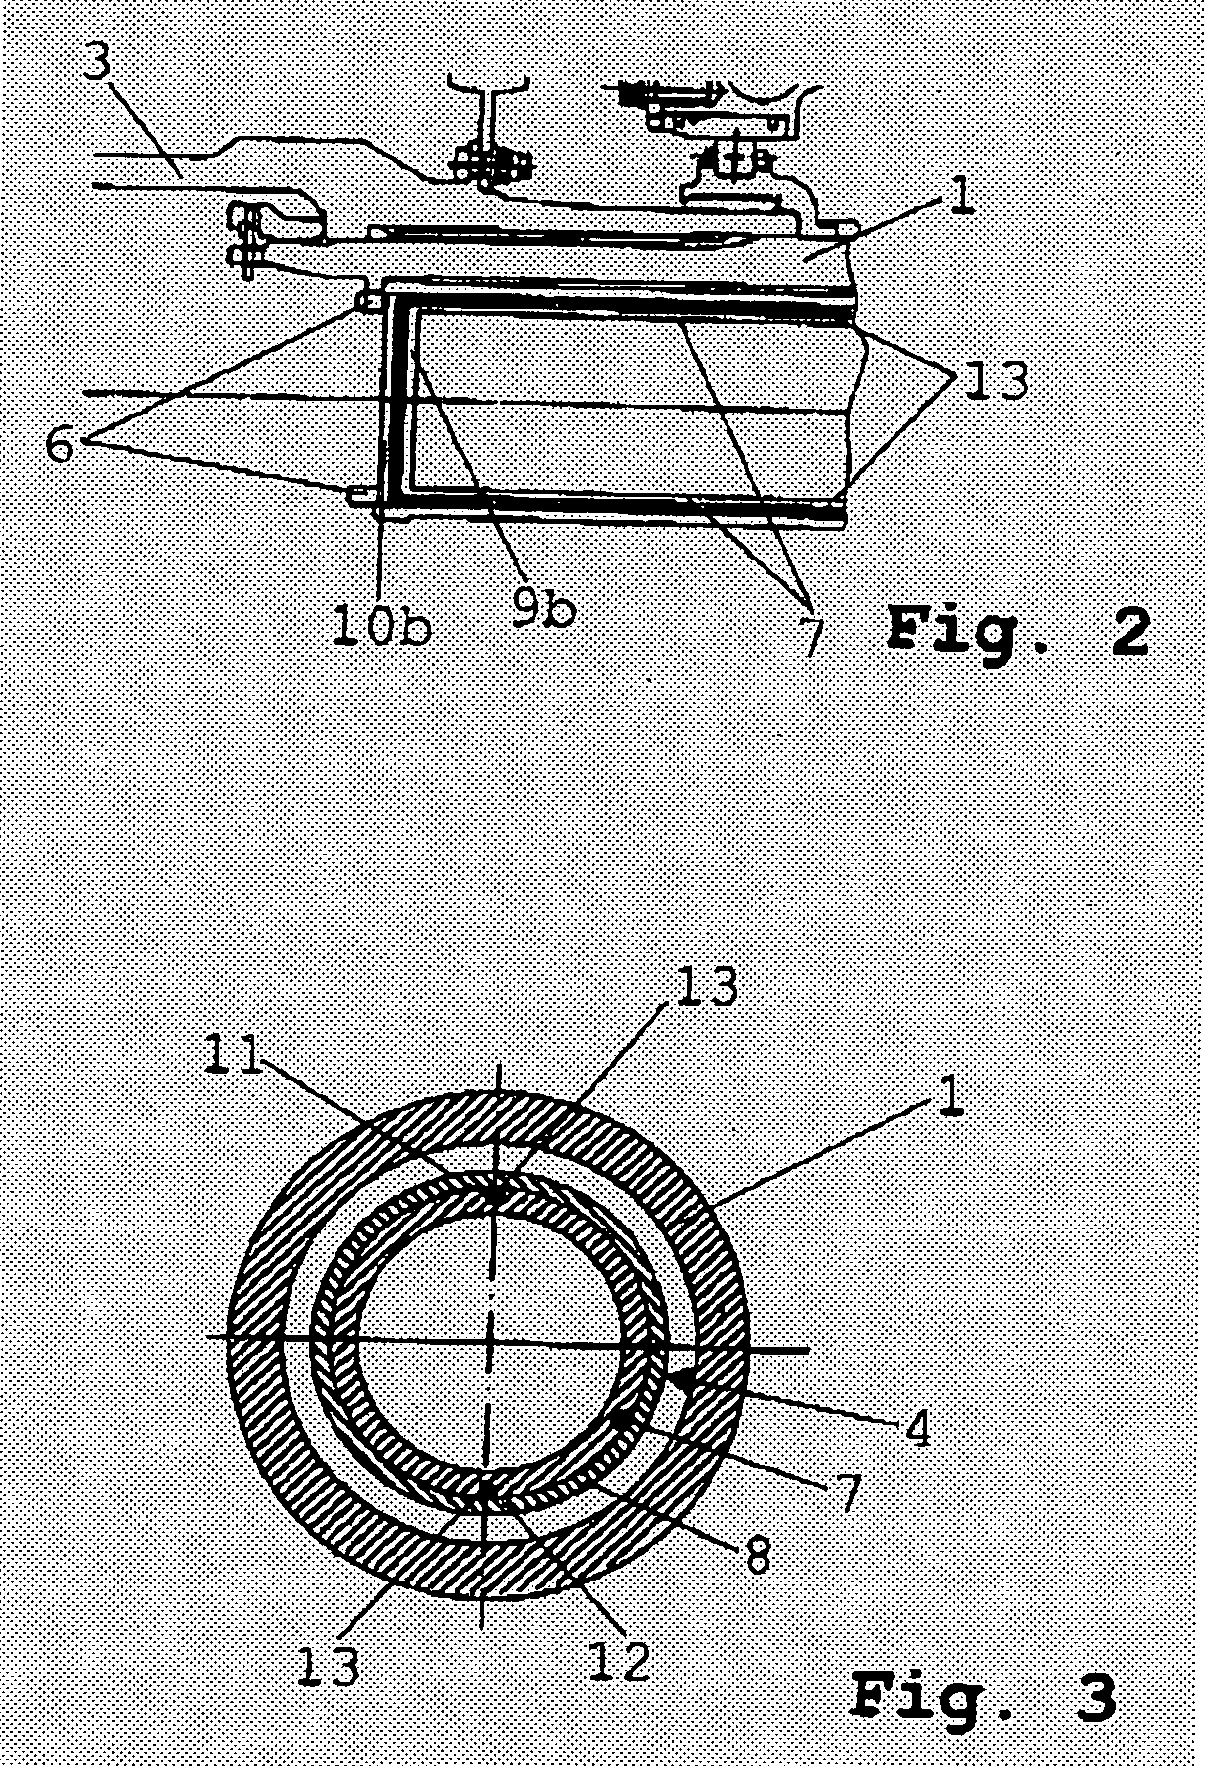 Electronic safety system for the avoidance of an overspeed condition in the event of a shaft failure